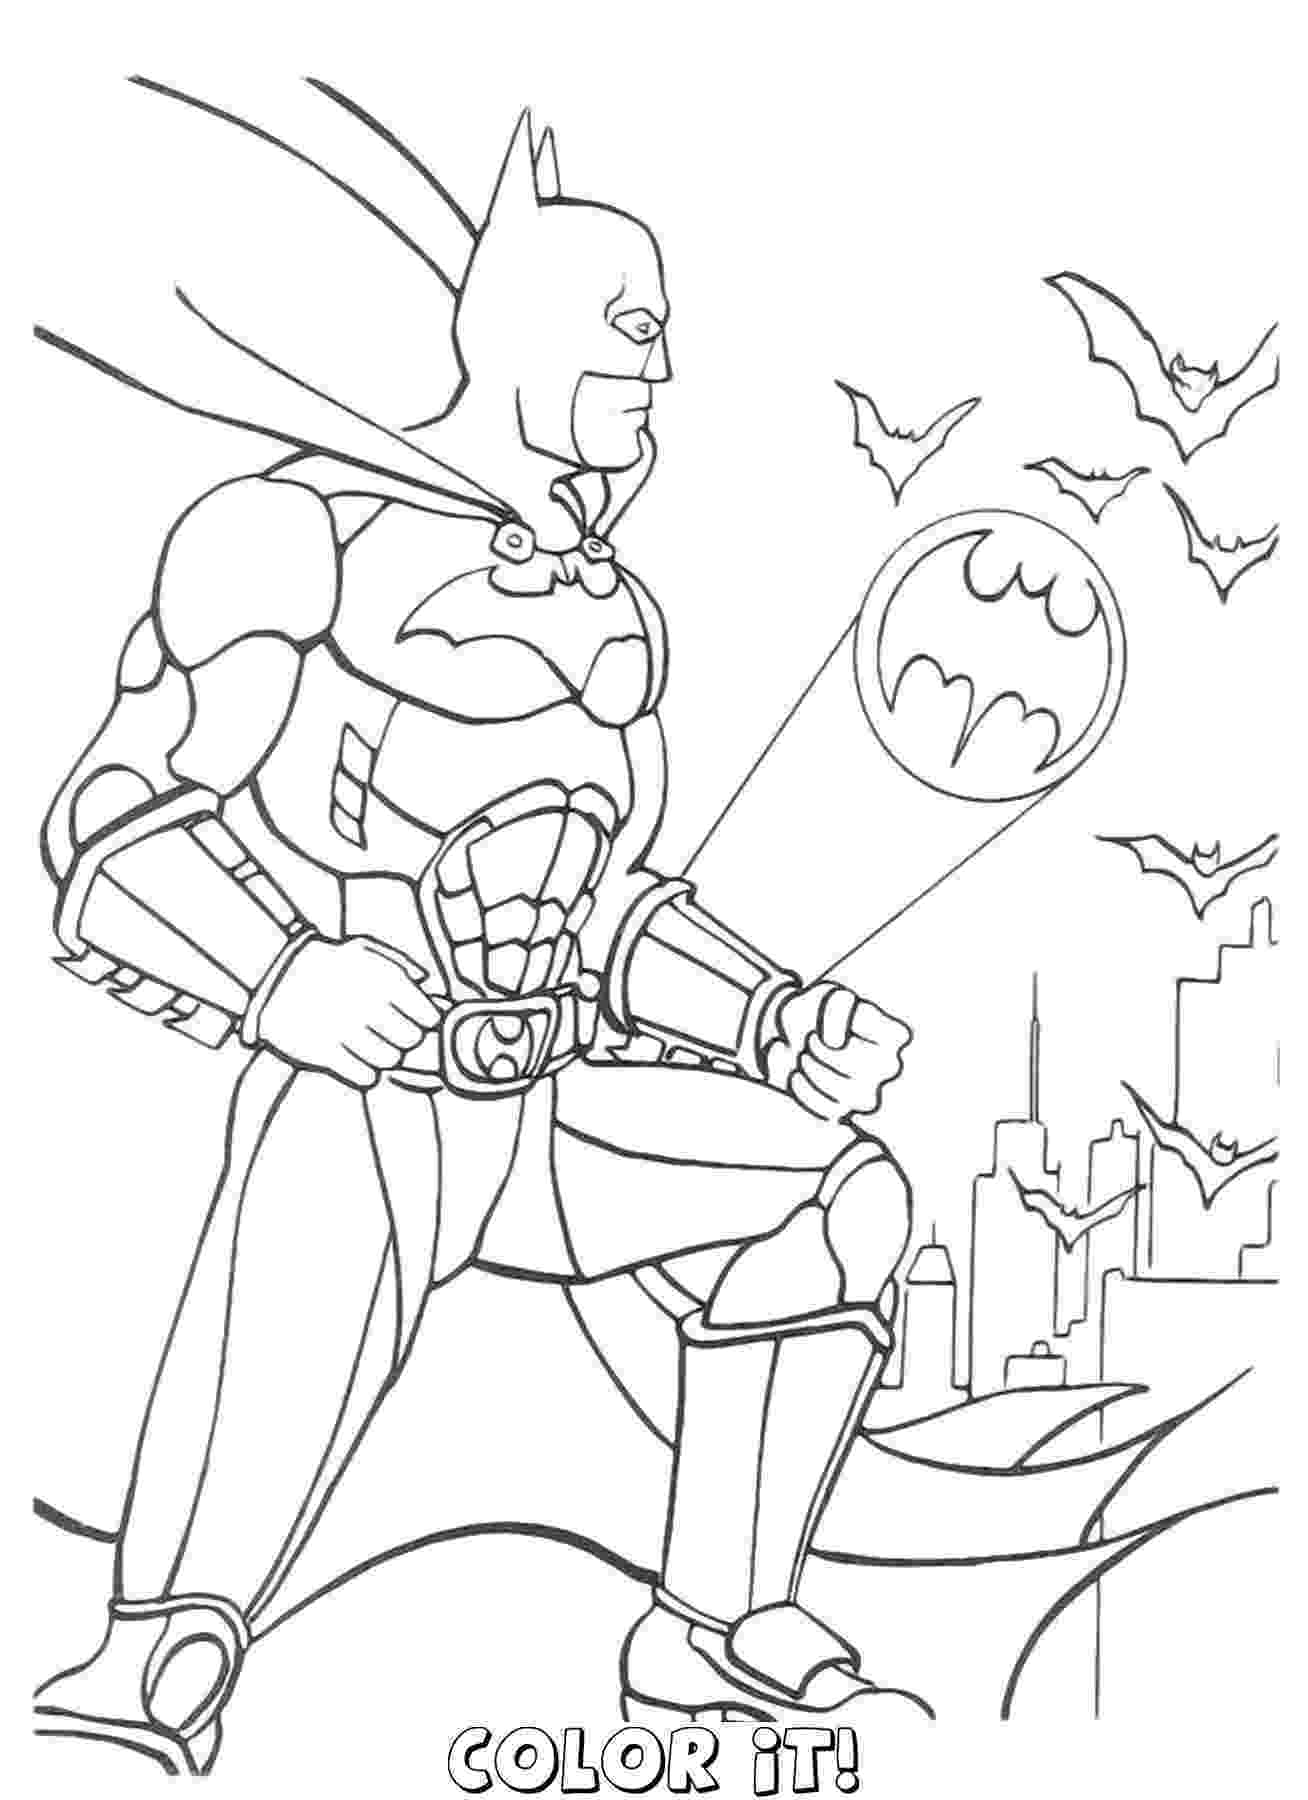 batman coloring pages free printable batman and robin coloring pages to download and print for free pages batman printable coloring free 